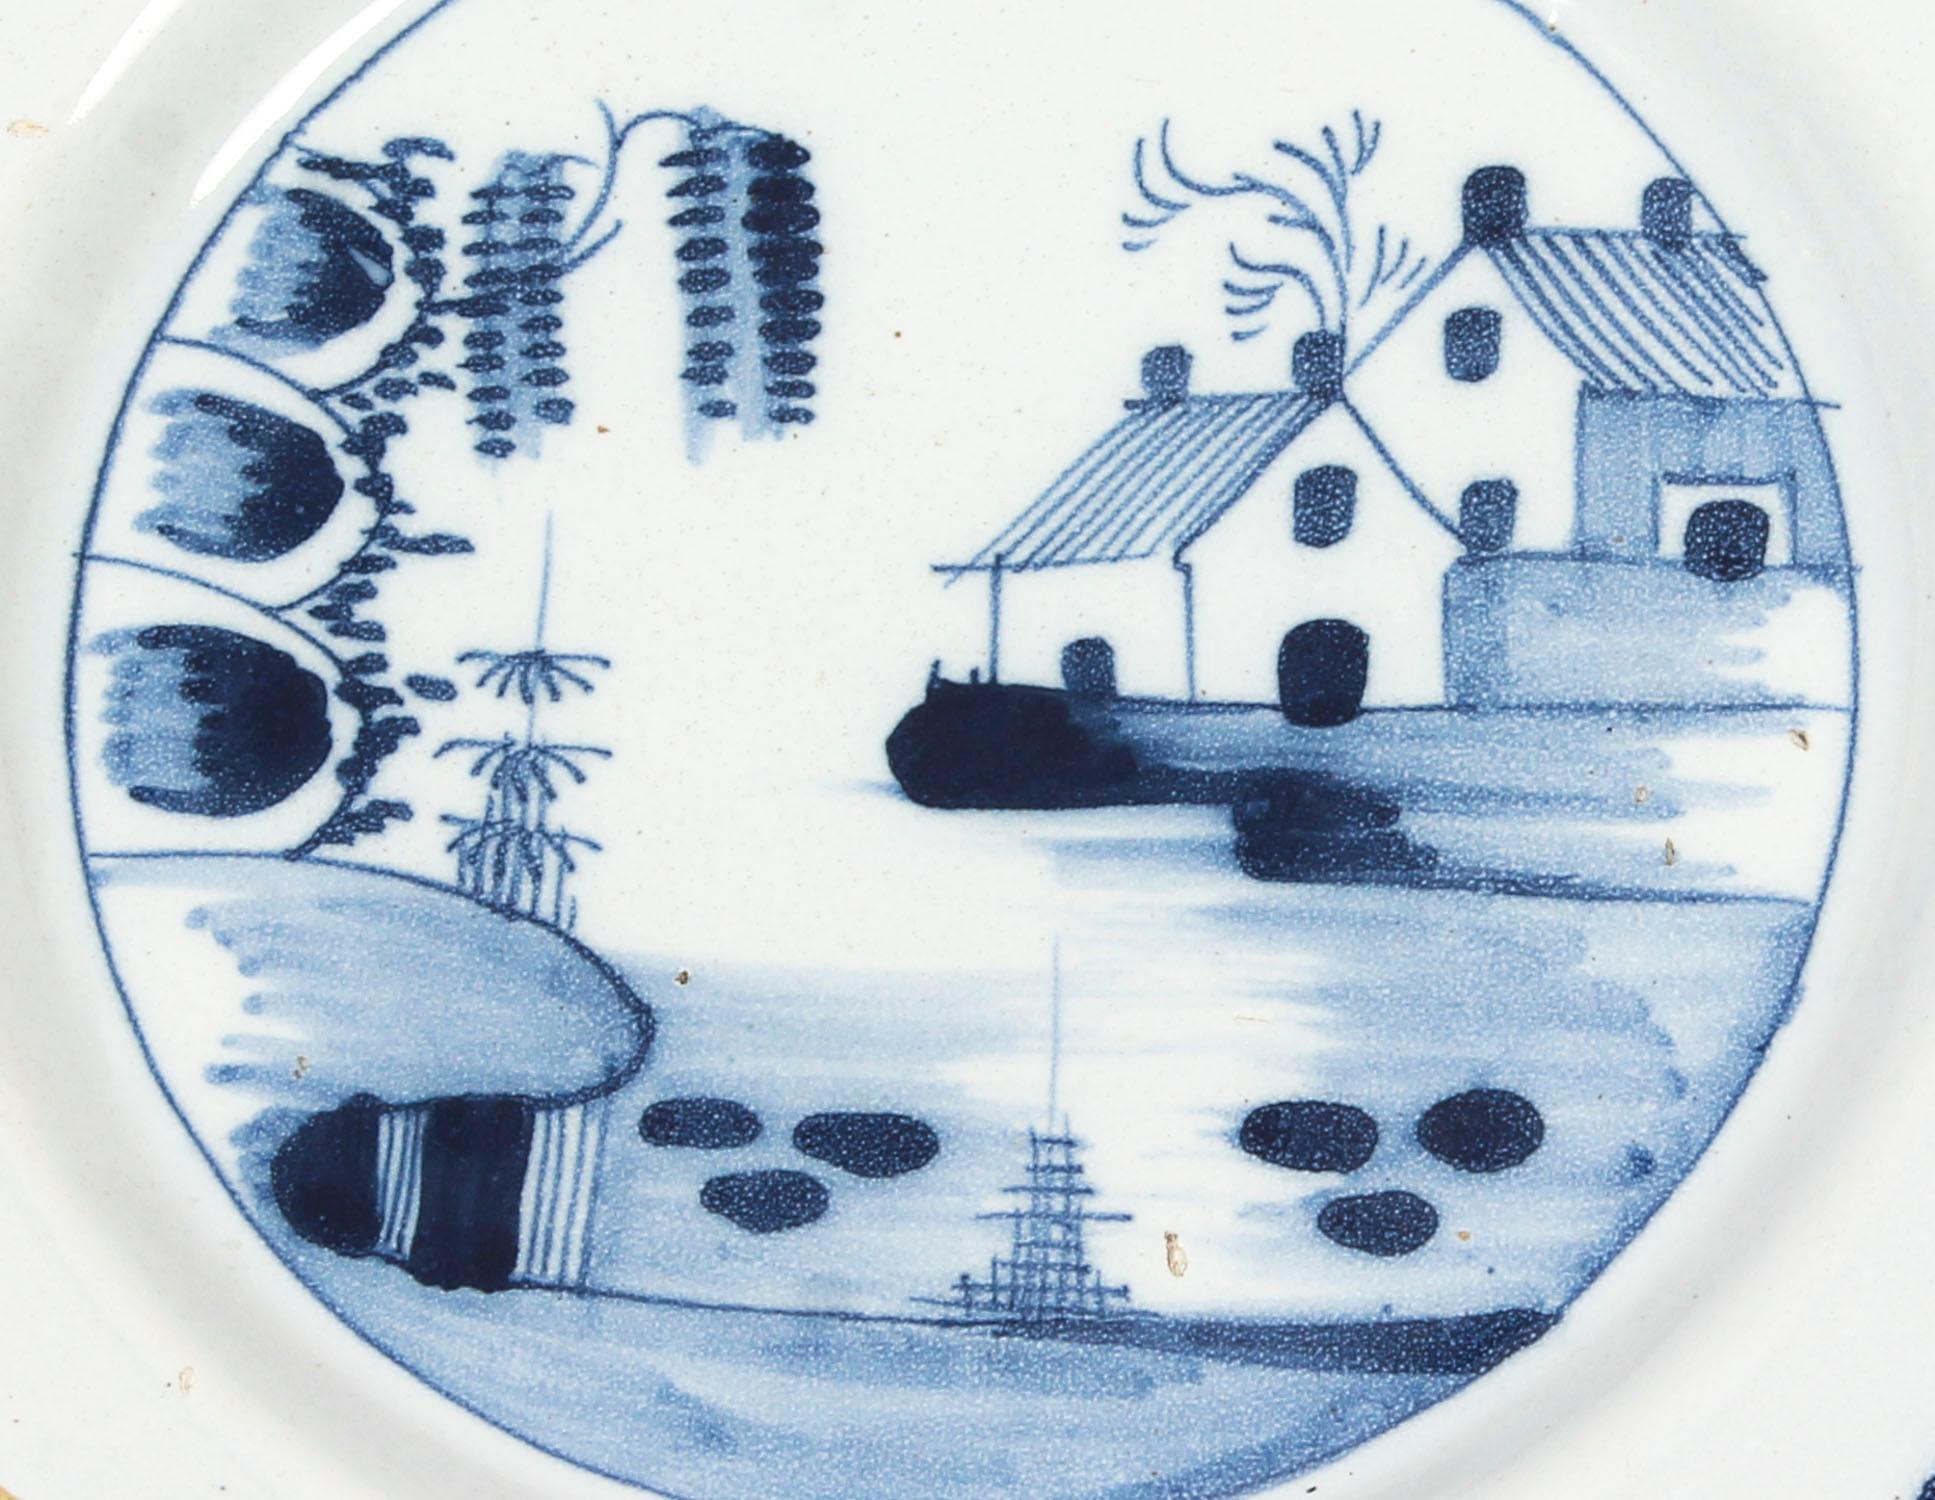 This is a beautiful antique English Delft blue and white decorated plate cabinet plate, circa 1780 in date.

English delft blue and white dish, decorated with houses on a bank of a river with a mimosa tree hanging over the side, inspired by the